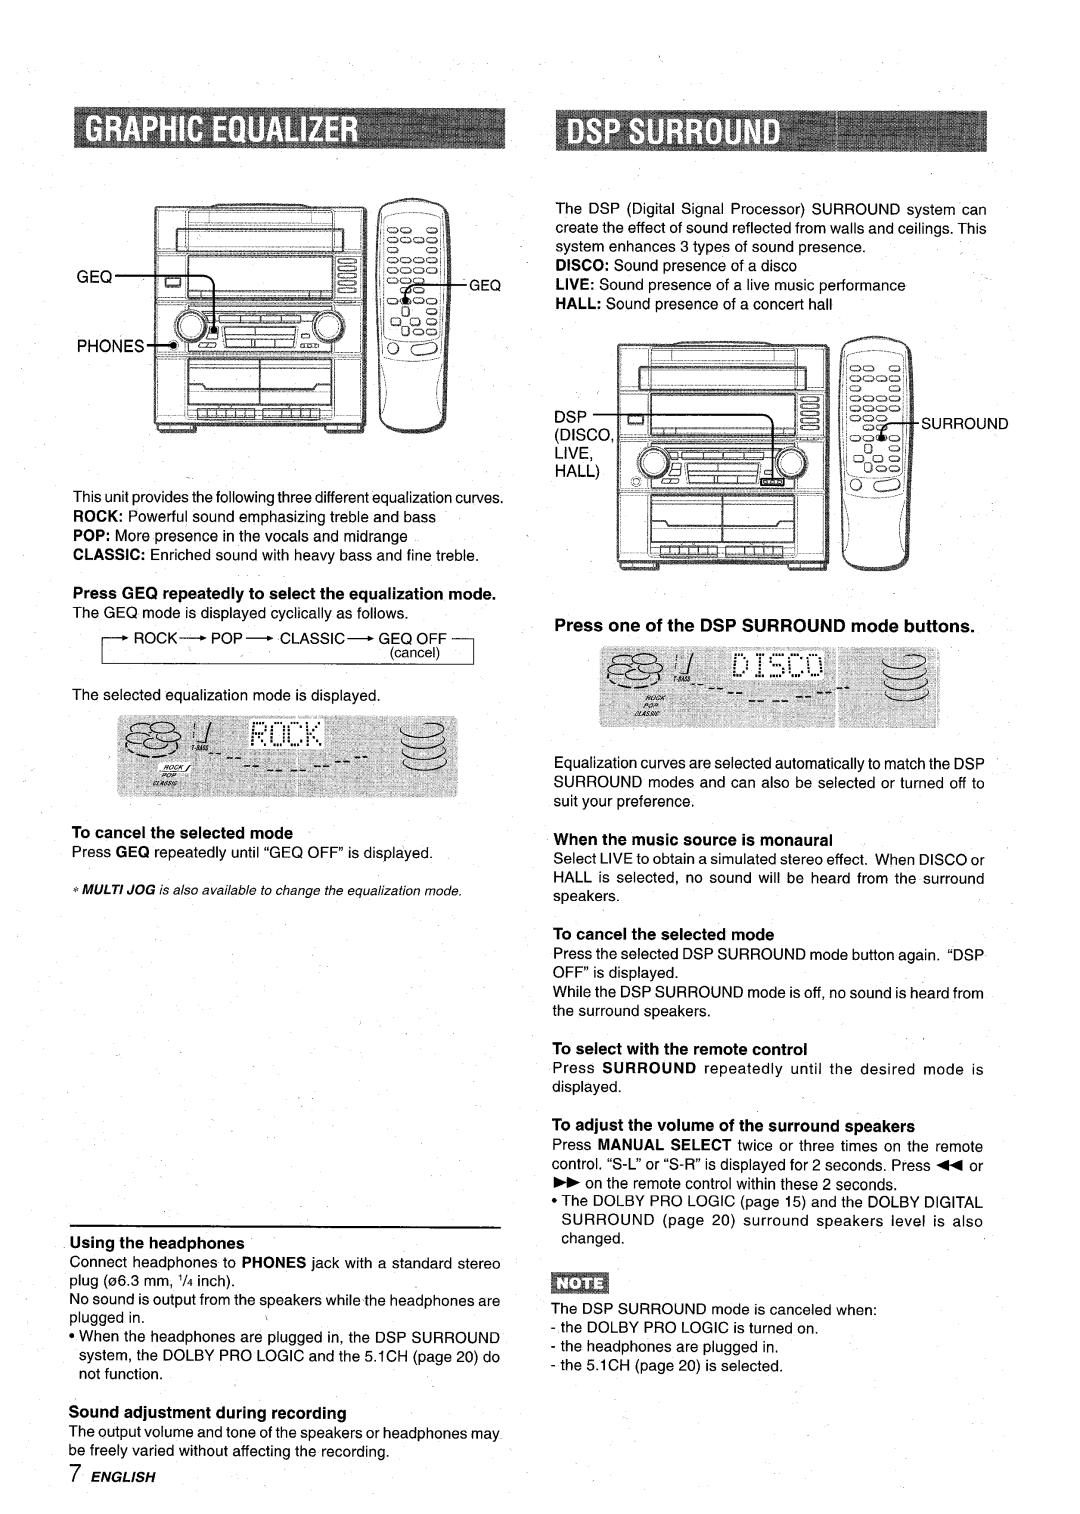 Aiwa Z-VR55 manual To cancel the selected mode, Sound adjustment during recording, HALL Sound presence of a concerl hall 